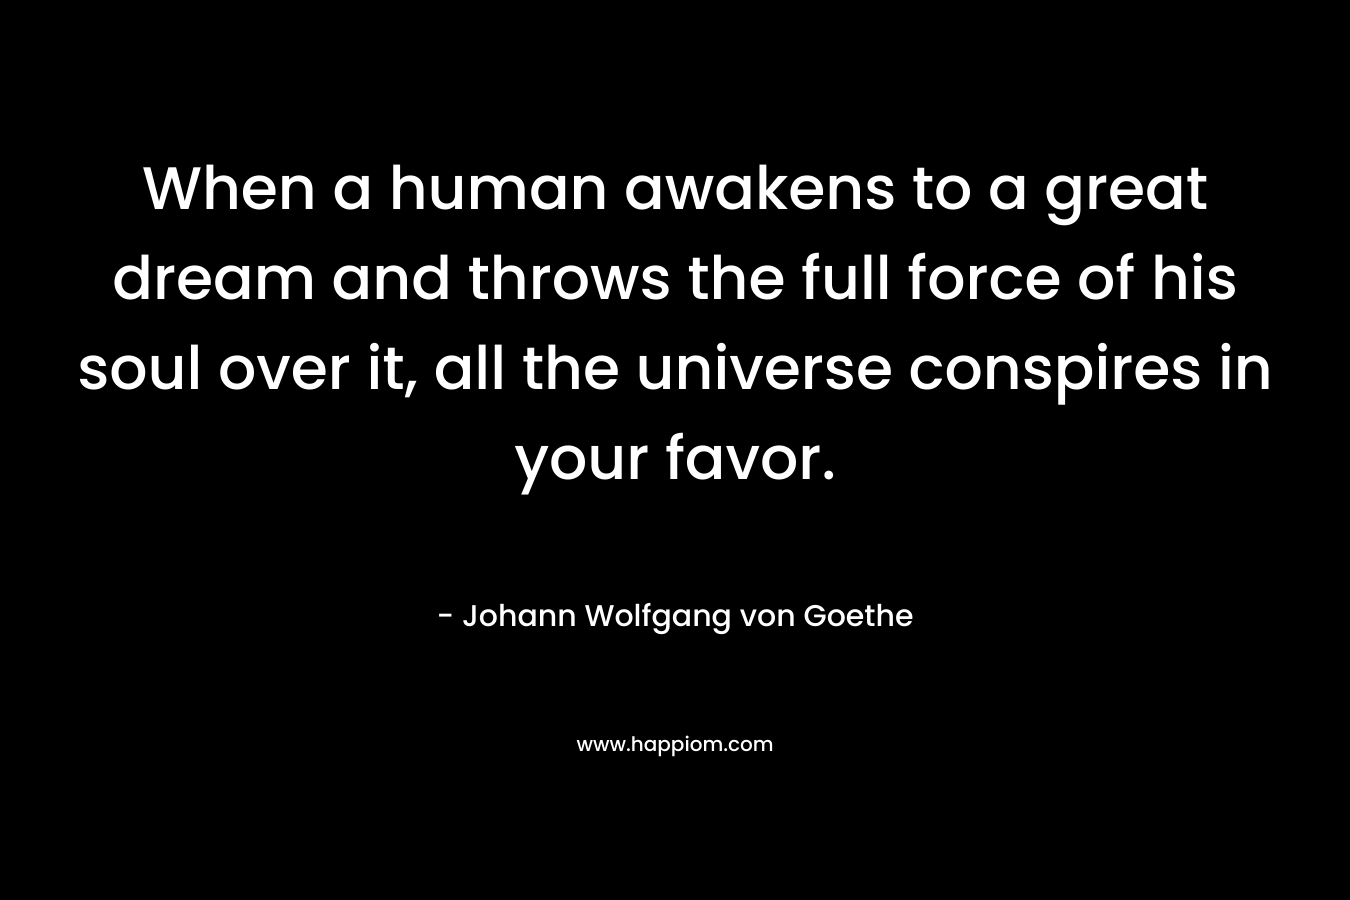 When a human awakens to a great dream and throws the full force of his soul over it, all the universe conspires in your favor.